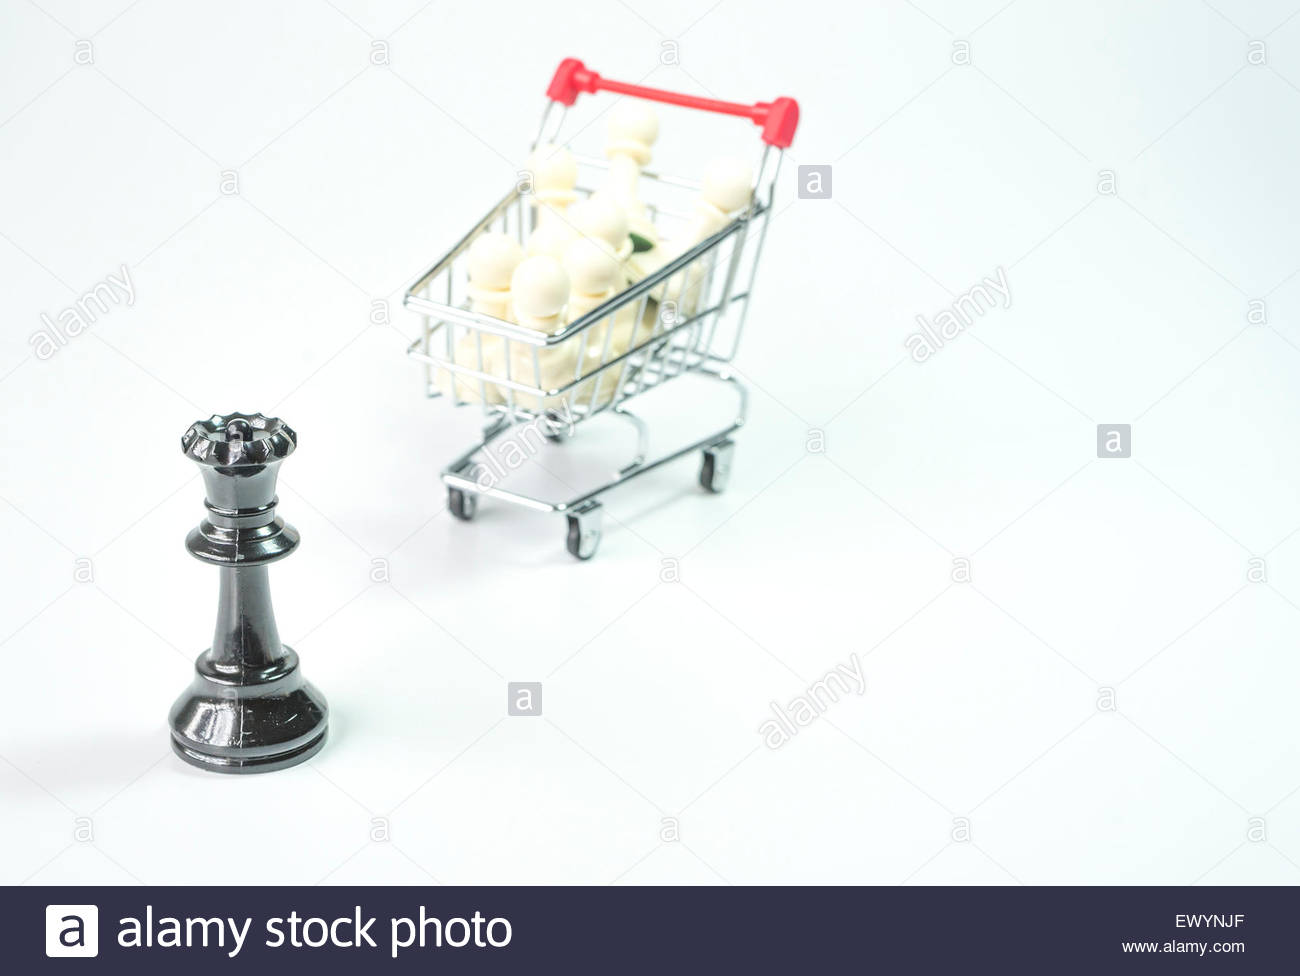 Black Queen And White Pawn Inside Trolley Background Stock Photo